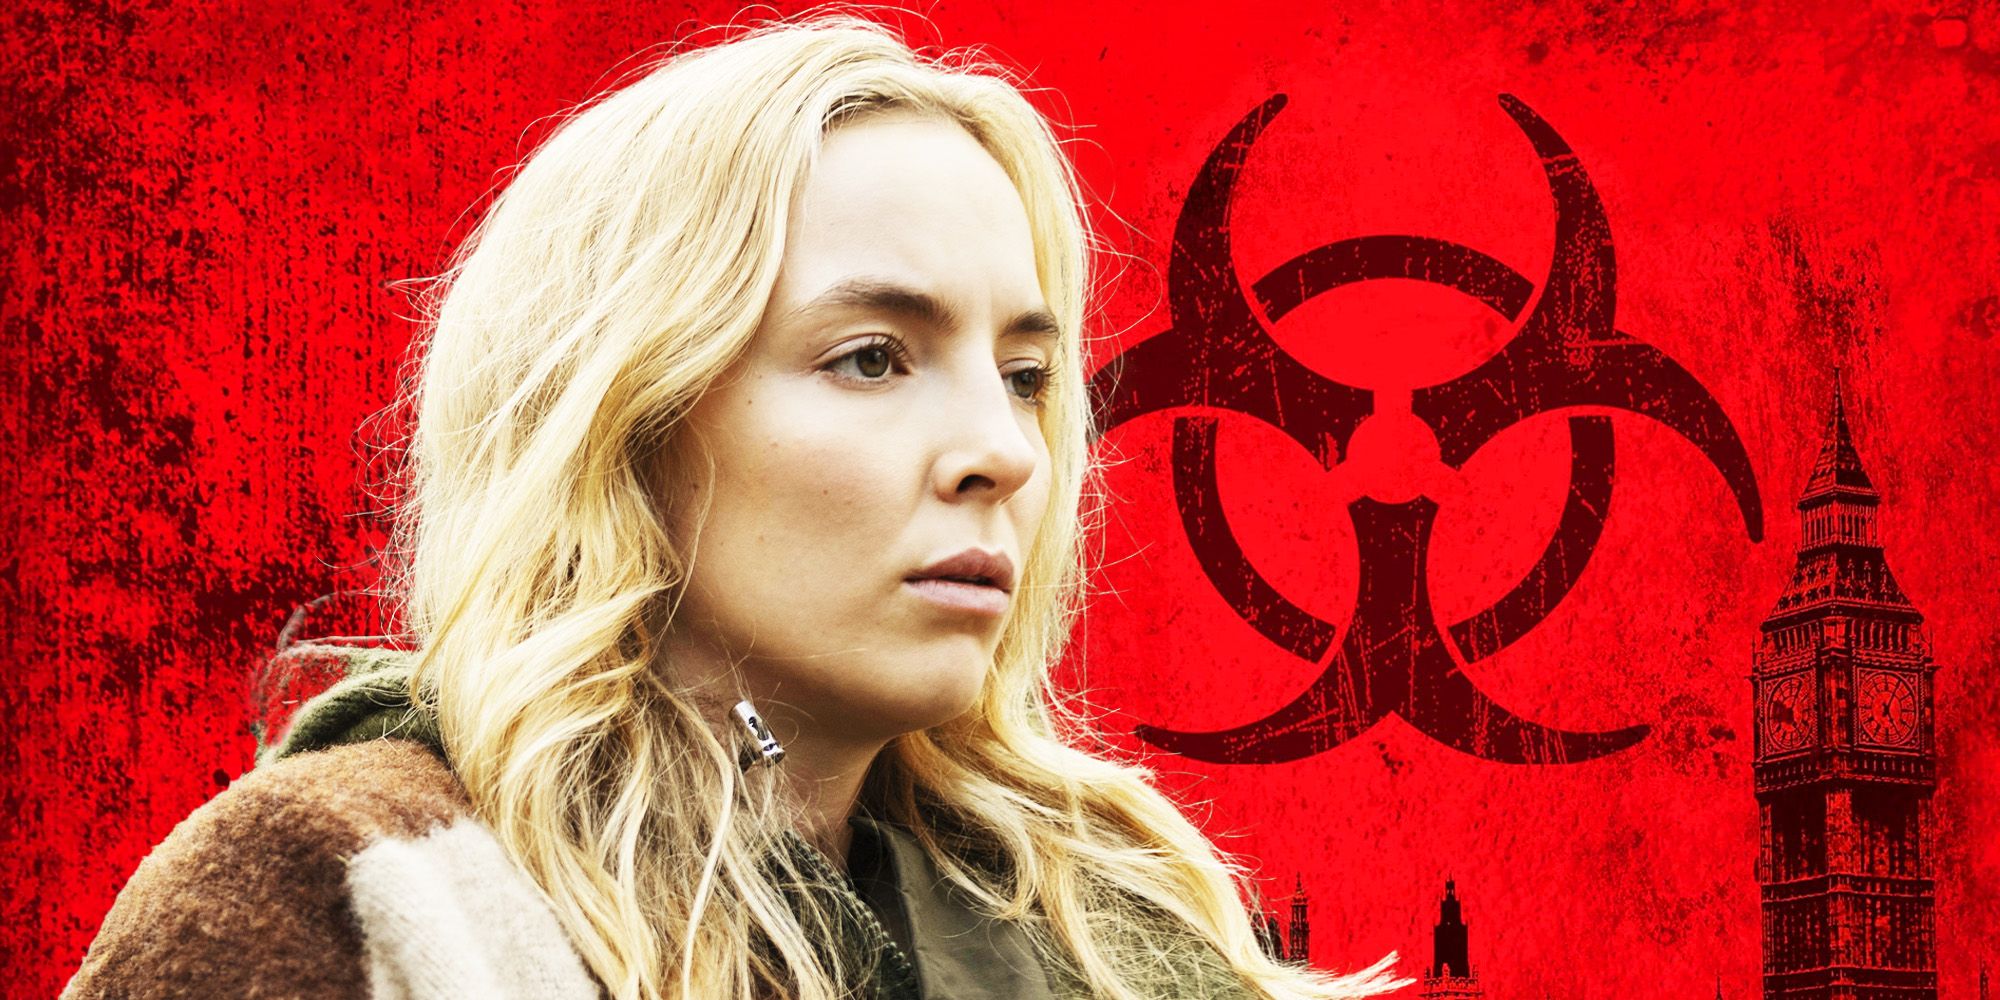 Jodie Comer and promo image from 28 Days Later